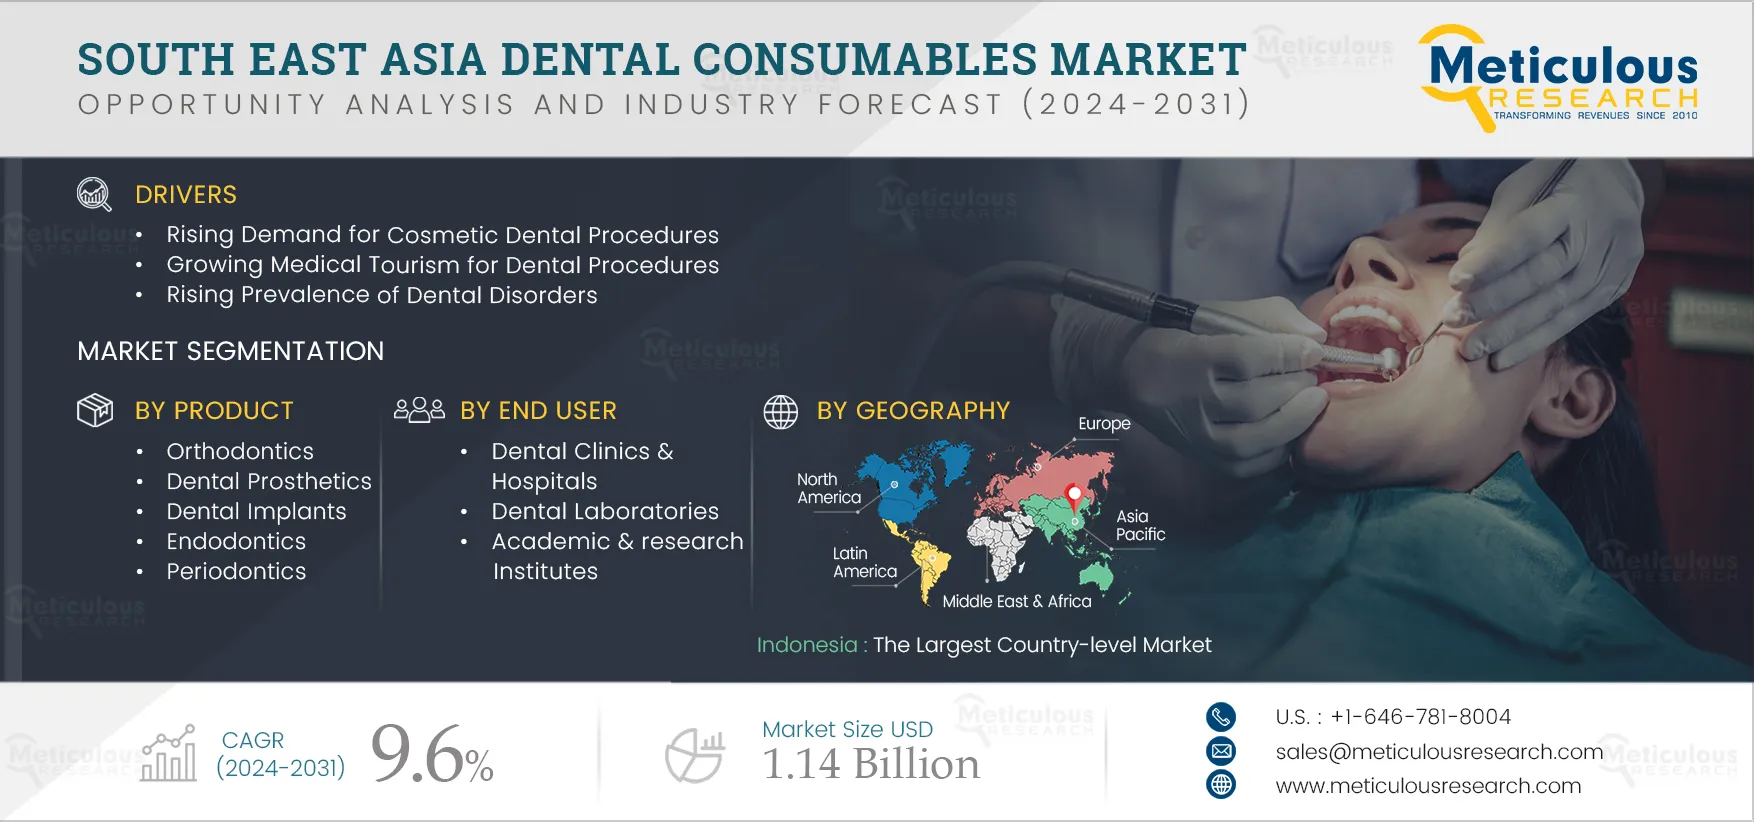 South East Asia Dental Consumables Market